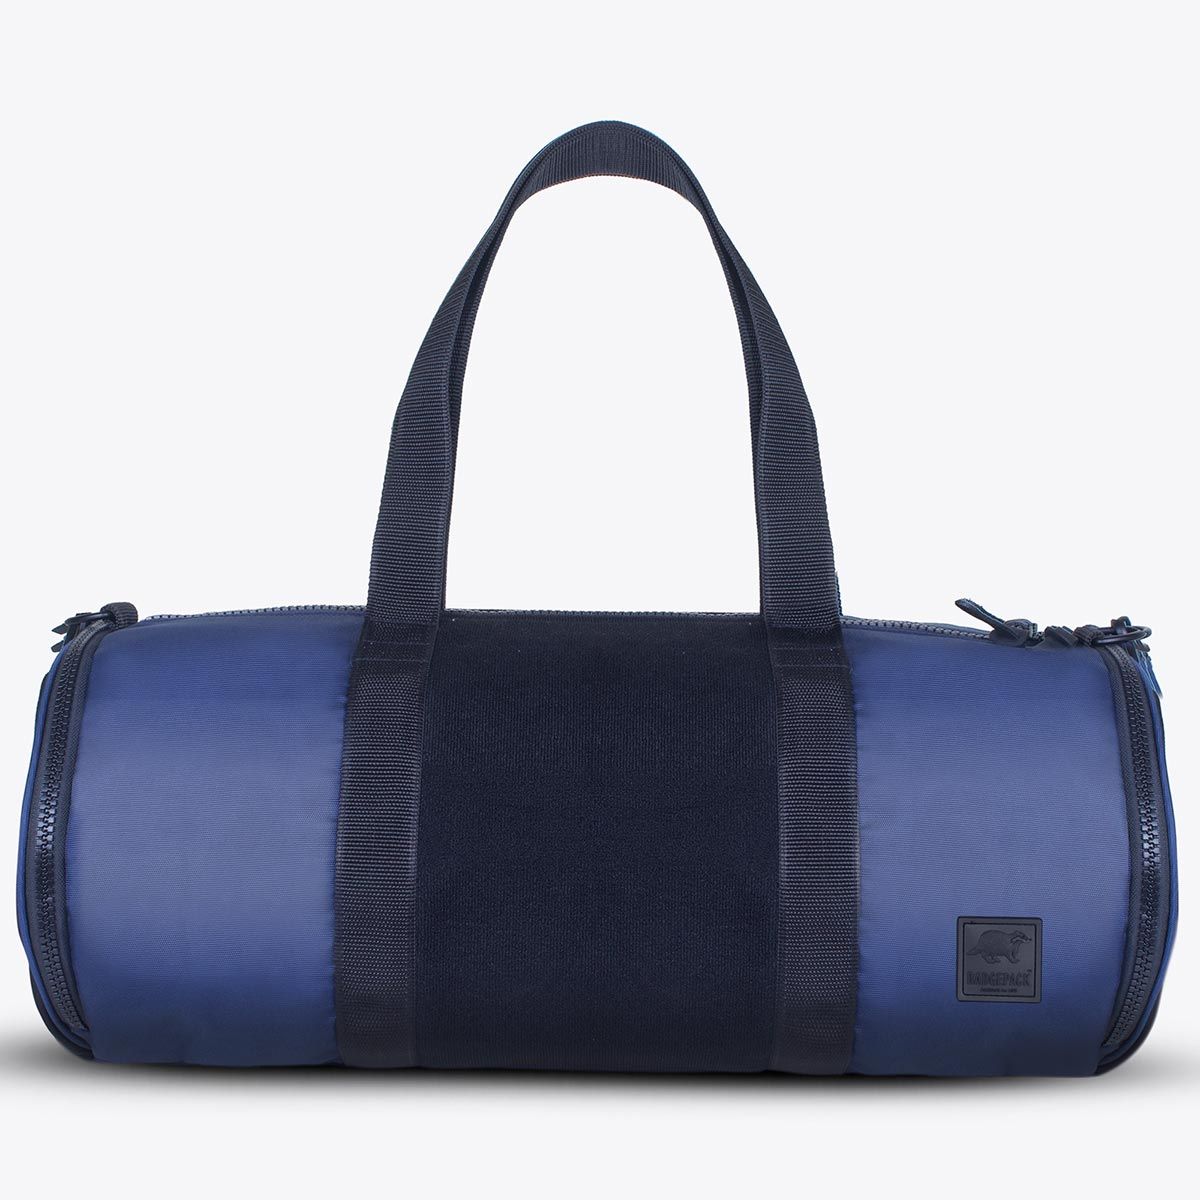 Spikey Polyester Navy Blue Duffle Trolley Bag For Travel